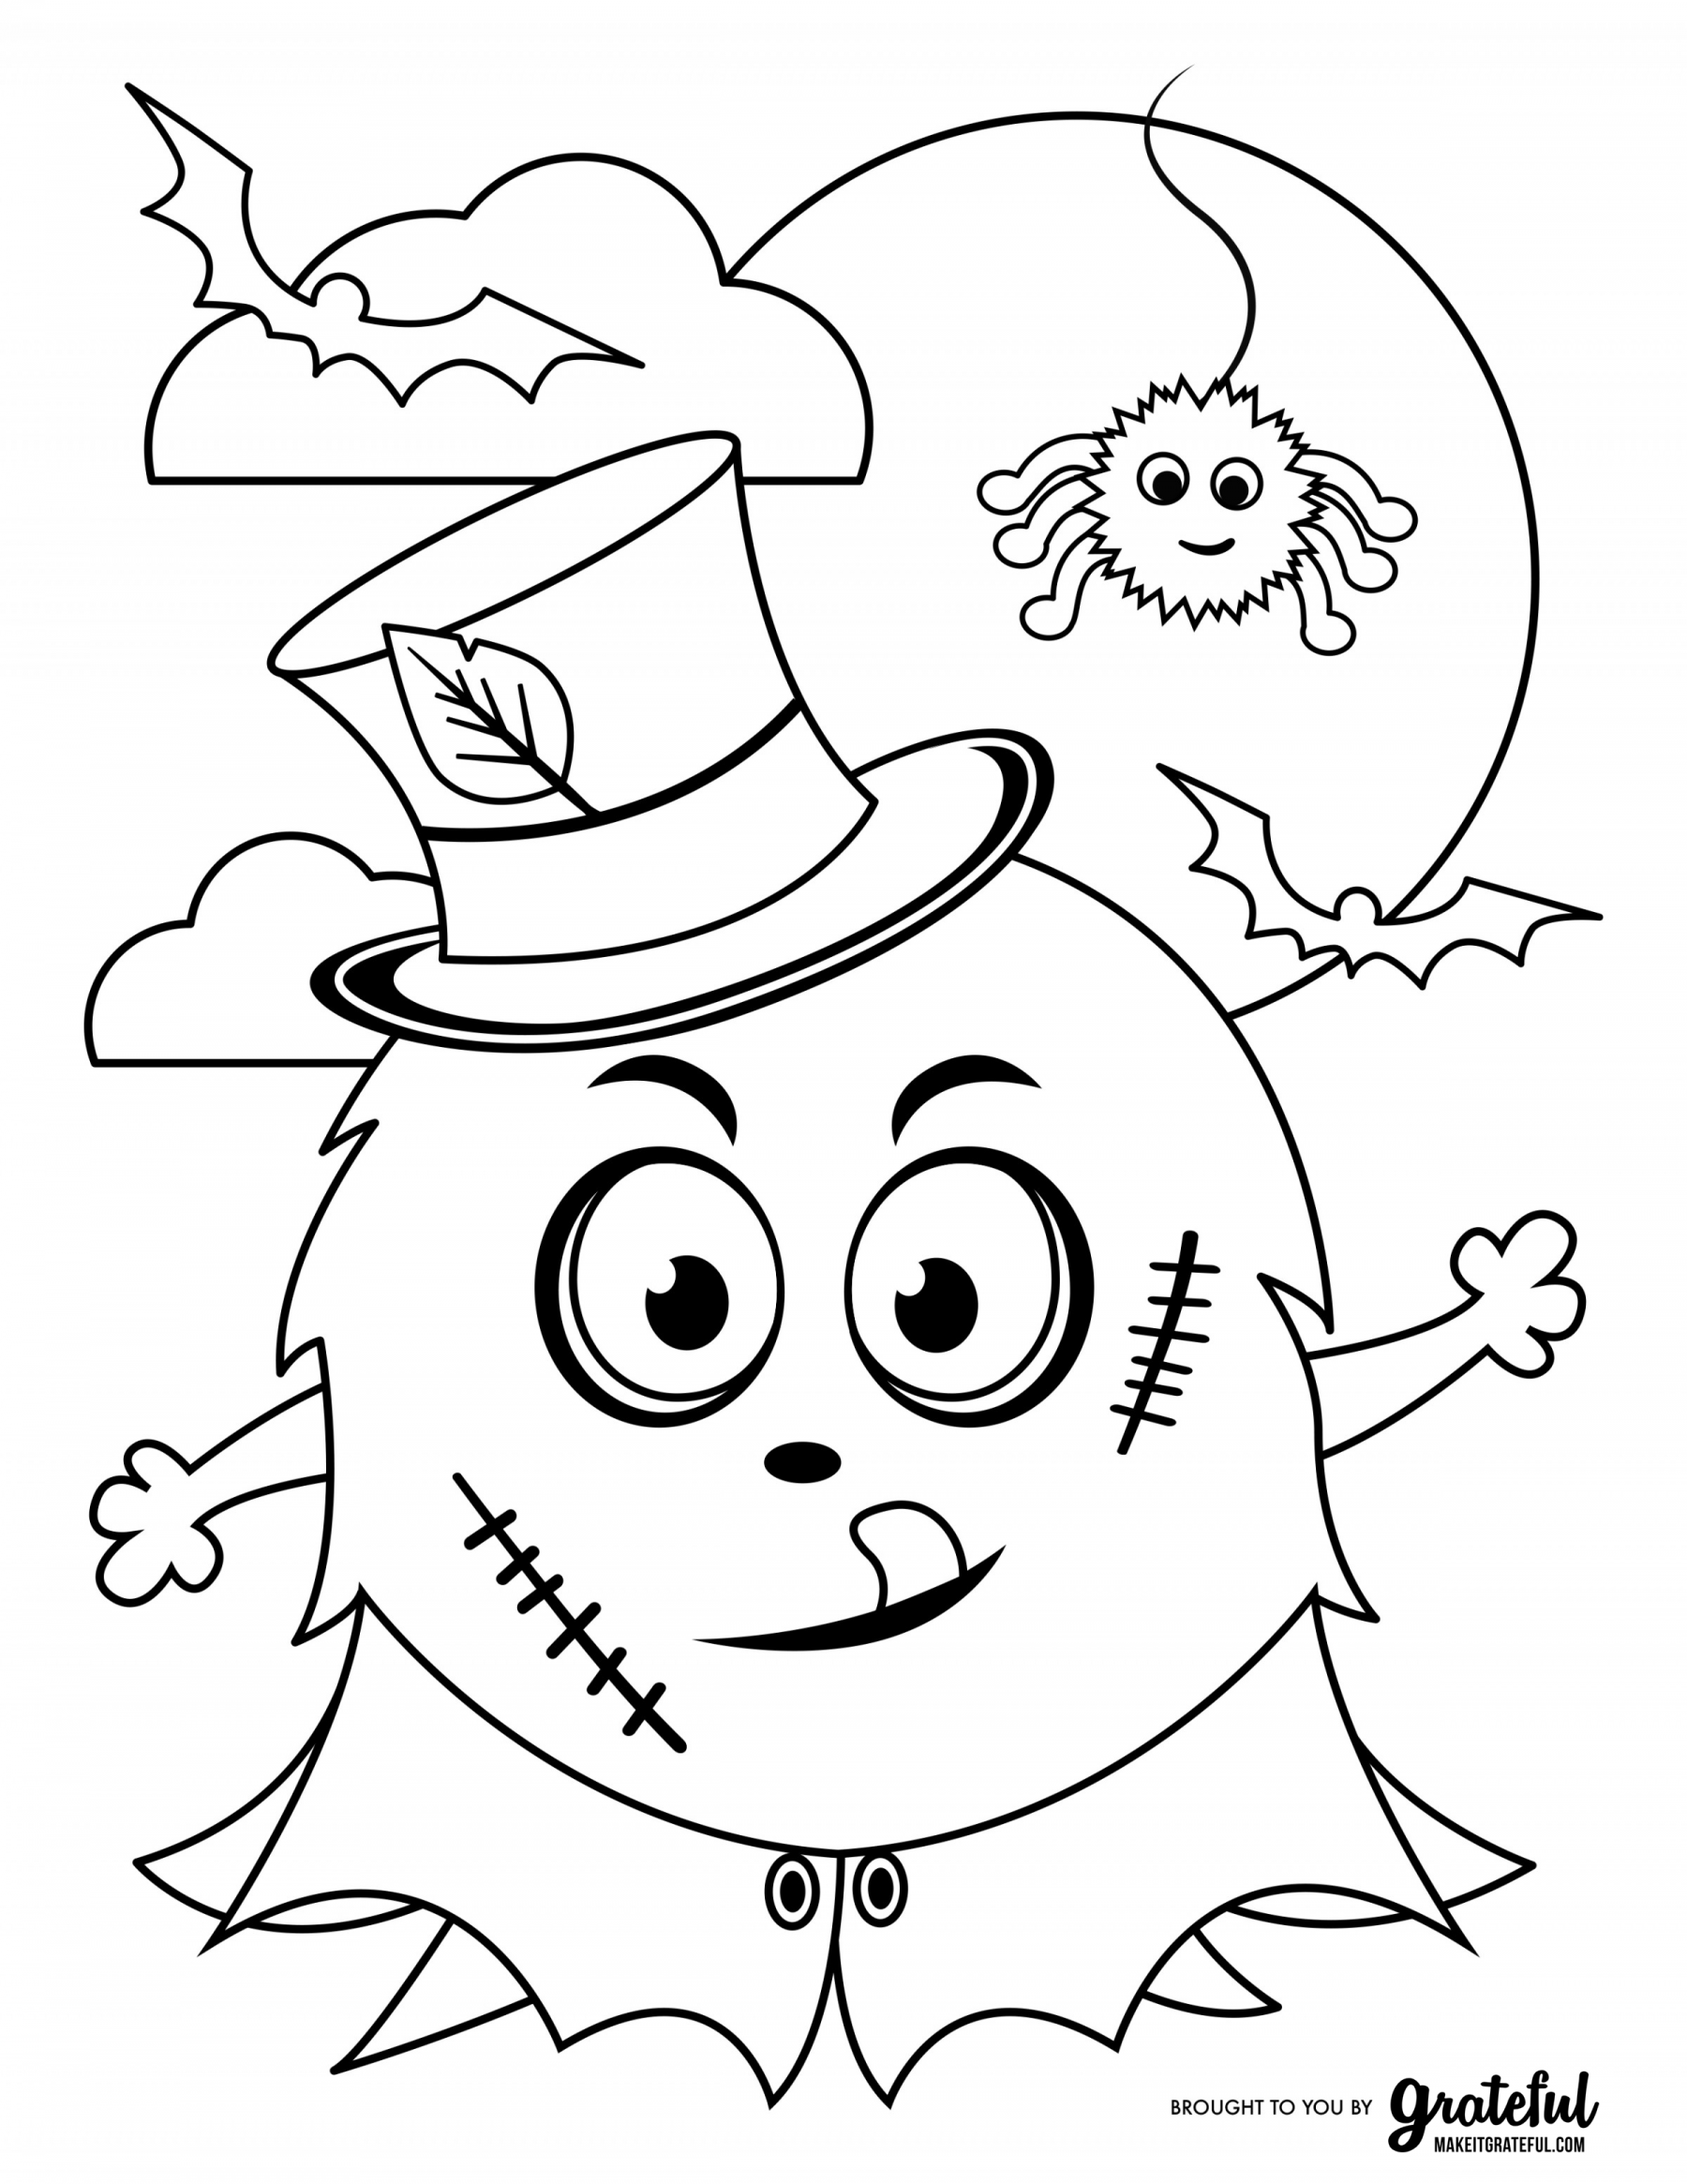 Halloween Decorations Coloring Pages - Coloring Home